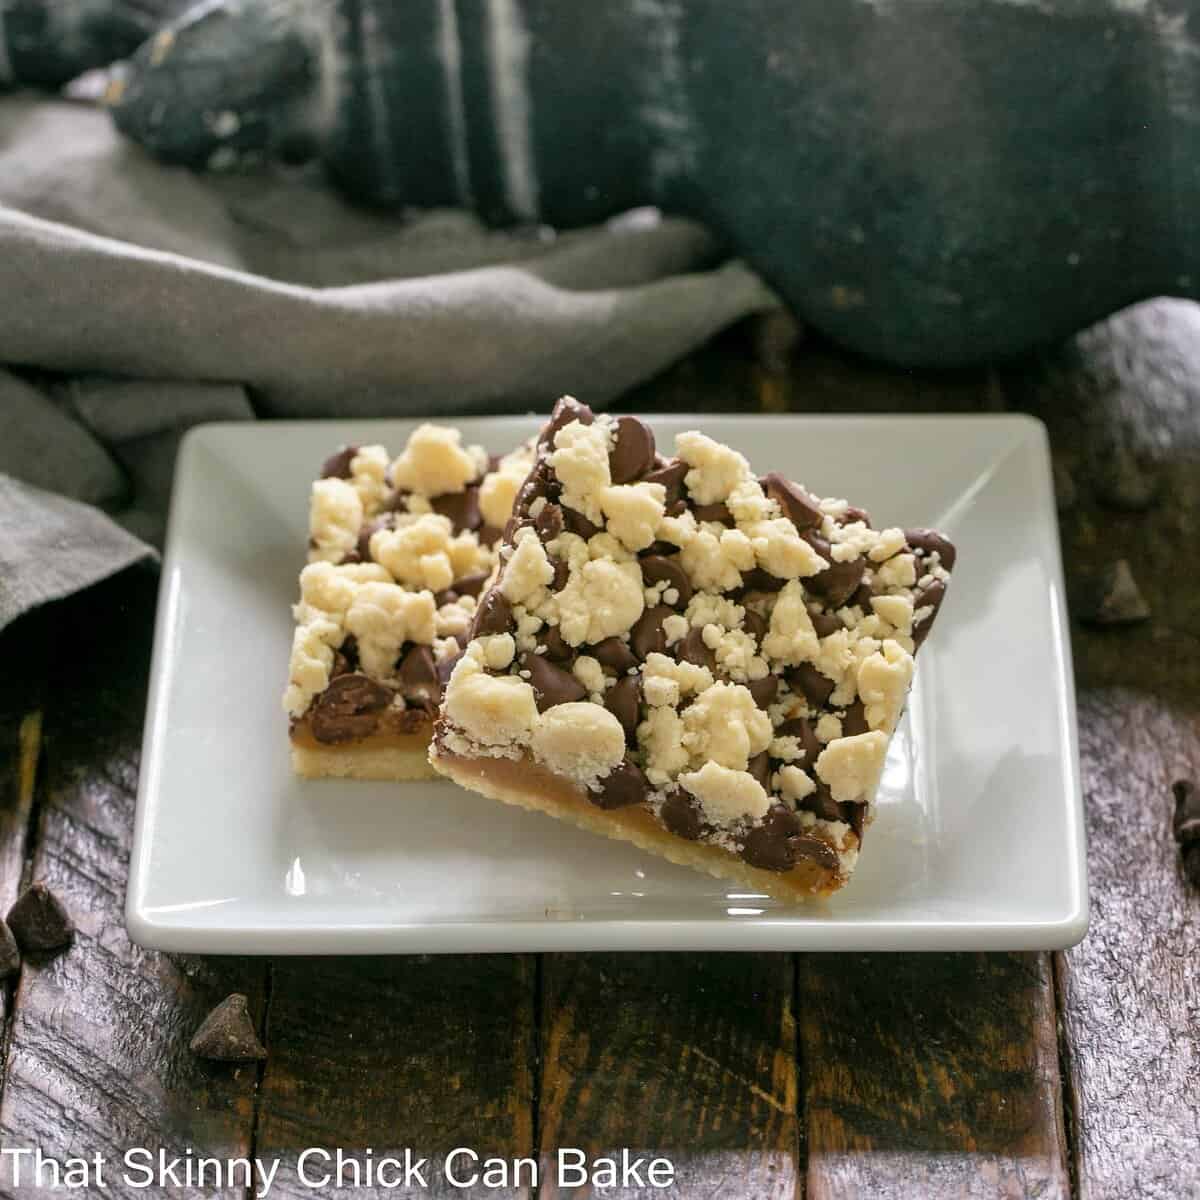 Chocolate Caramel Bars with Streusel - Rich & Easy - That Skinny Chick Can Bake